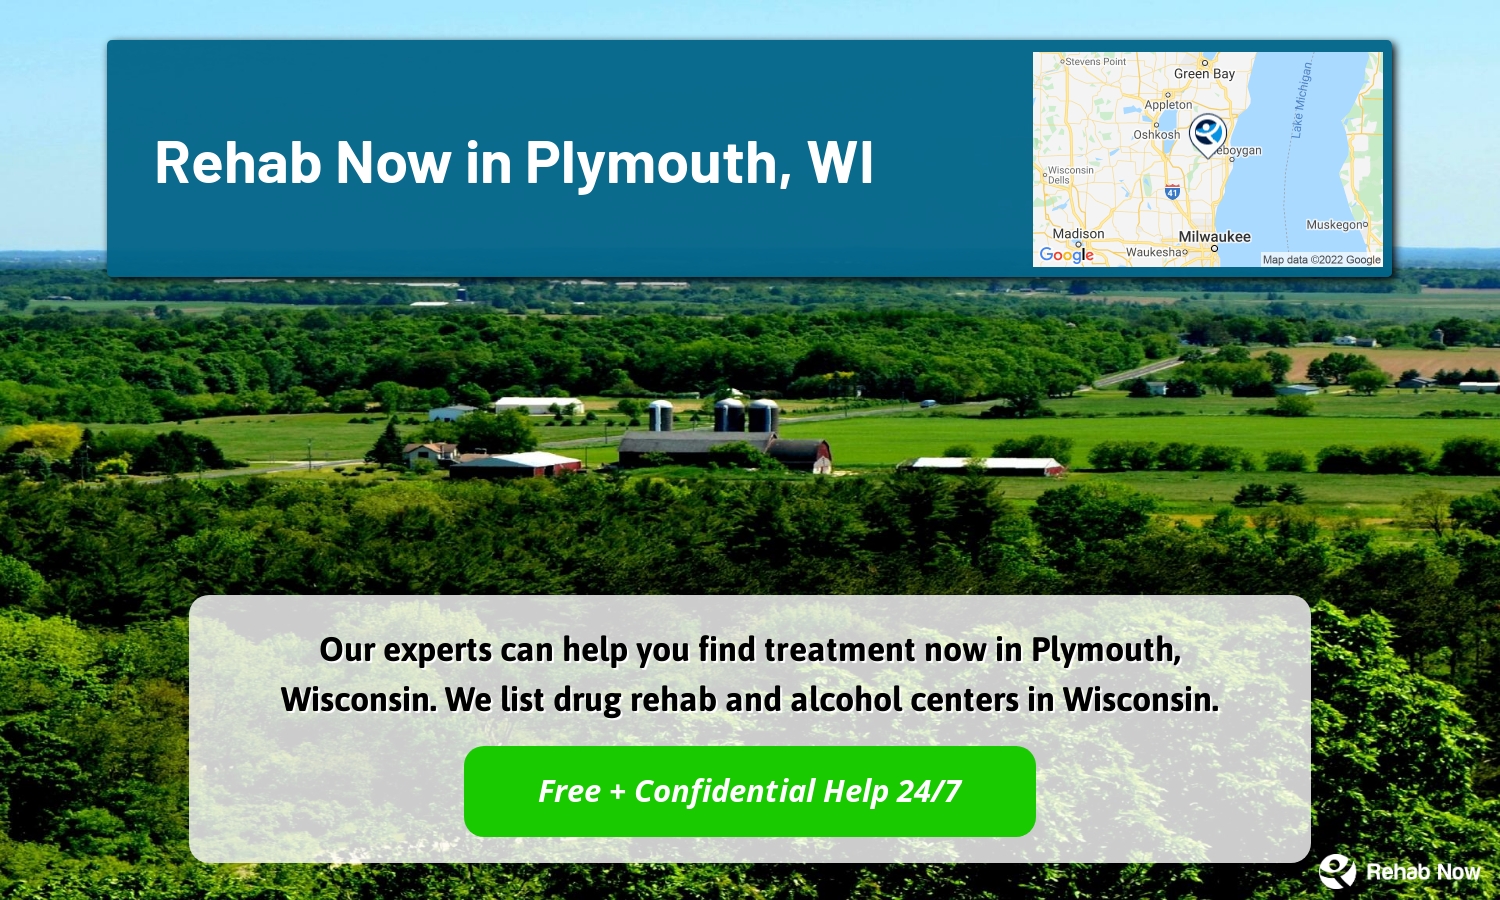 Our experts can help you find treatment now in Plymouth, Wisconsin. We list drug rehab and alcohol centers in Wisconsin.